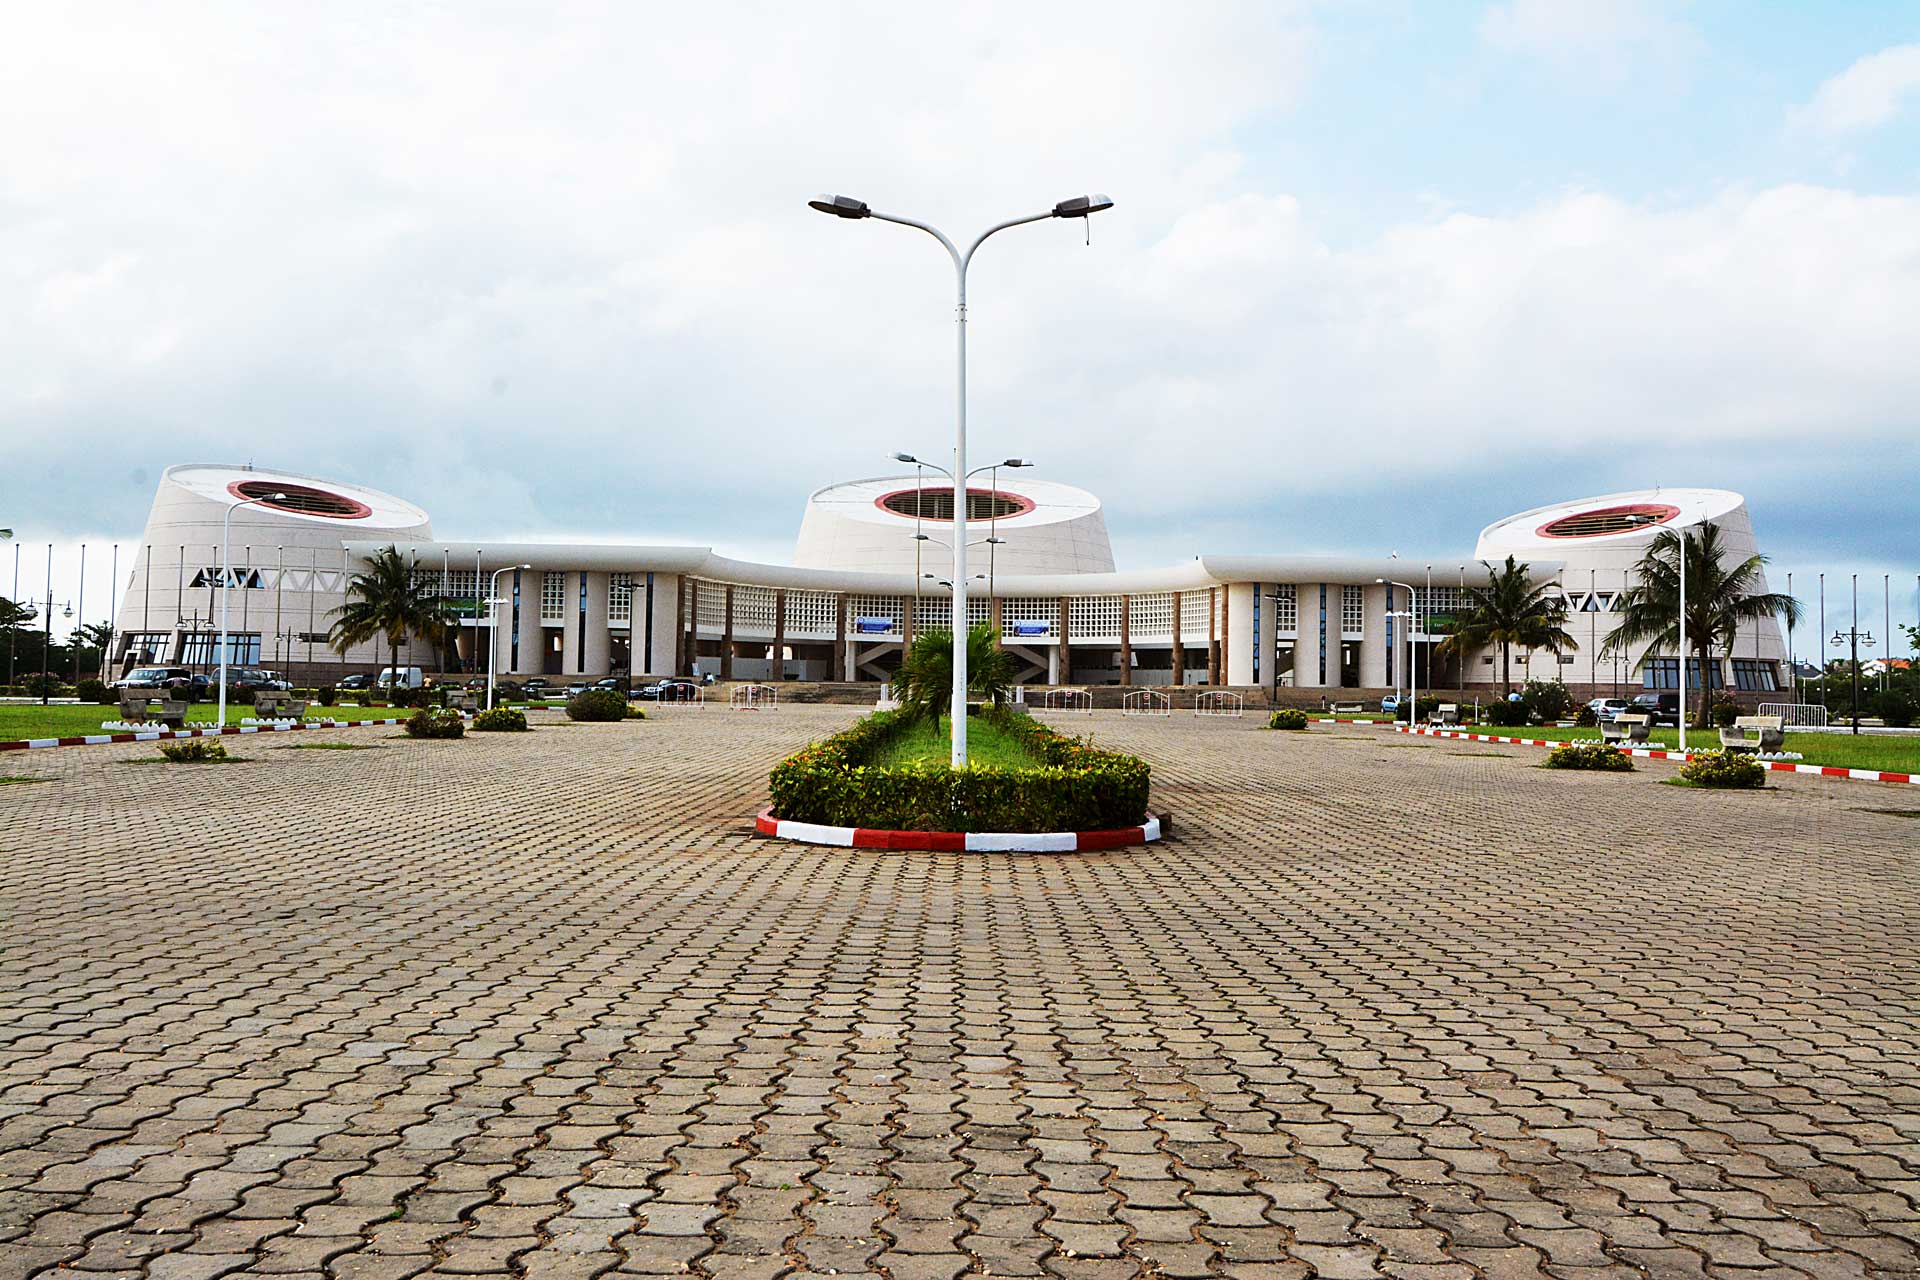 A large, modern building with a distinctive curved white facade and circular windows near the roof stands prominently. The foreground features a patterned pavement leading to the entrance, surrounded by street lamps and landscaped greenery under an overcast sky.